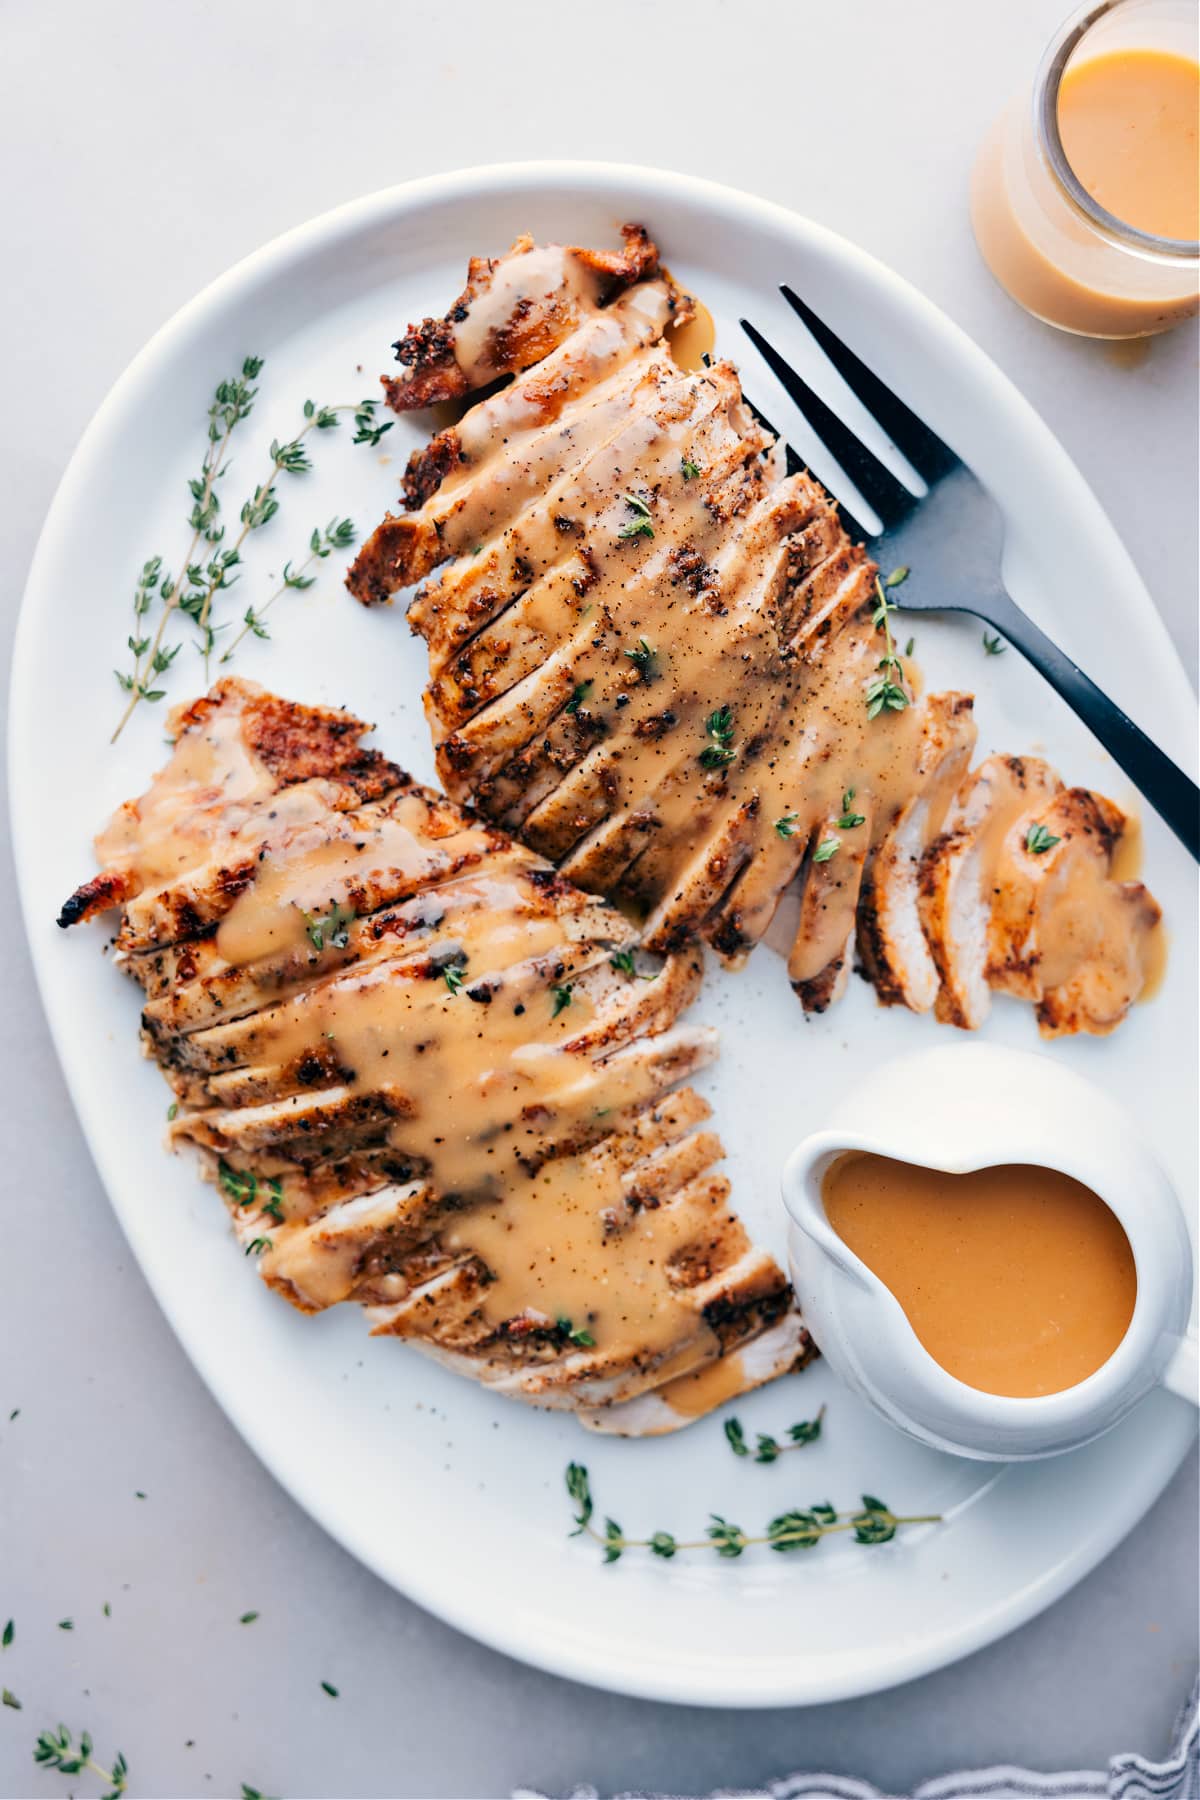 Sliced turkey breast cooked in a crockpot, served on a plate topped with gravy and garnished with fresh herbs.